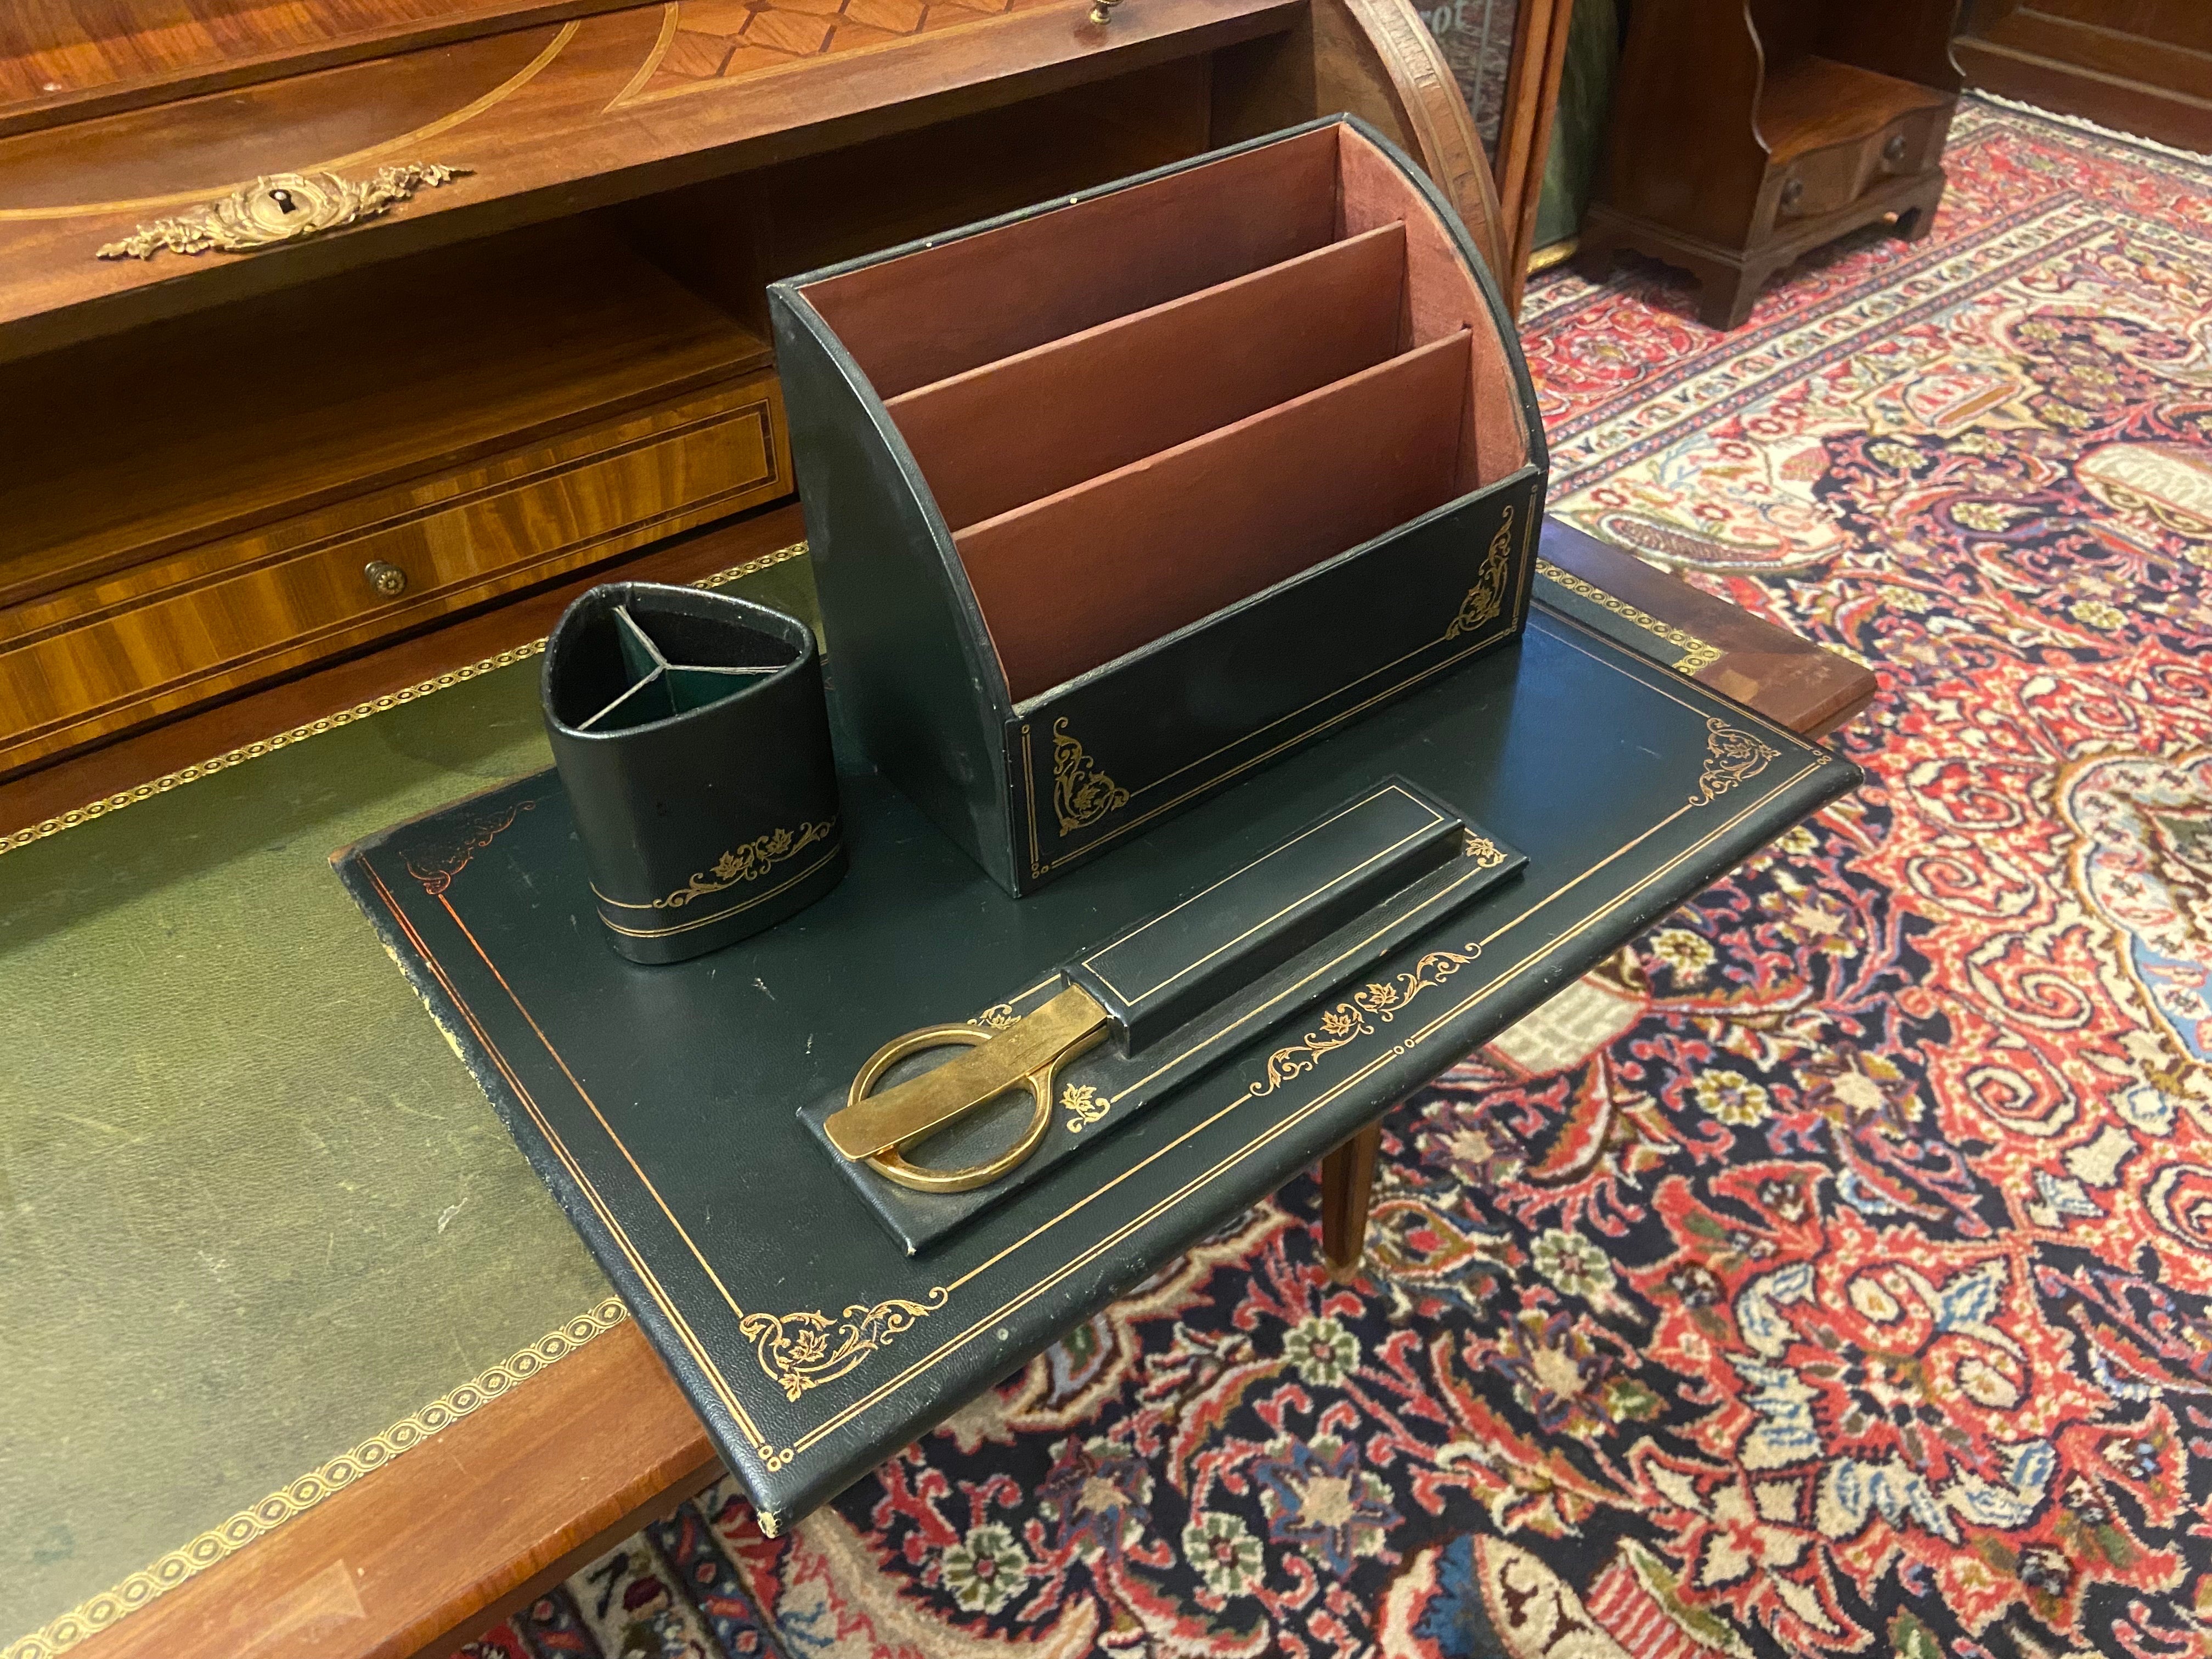 Great five piece French leather desk set by Le Tanneur. All pieces wrapped in very dark green leather. Desk set includes a desk pad which is a folder as well, pen holder, mail holder, scissors and letter opener. All pieces are in quite good